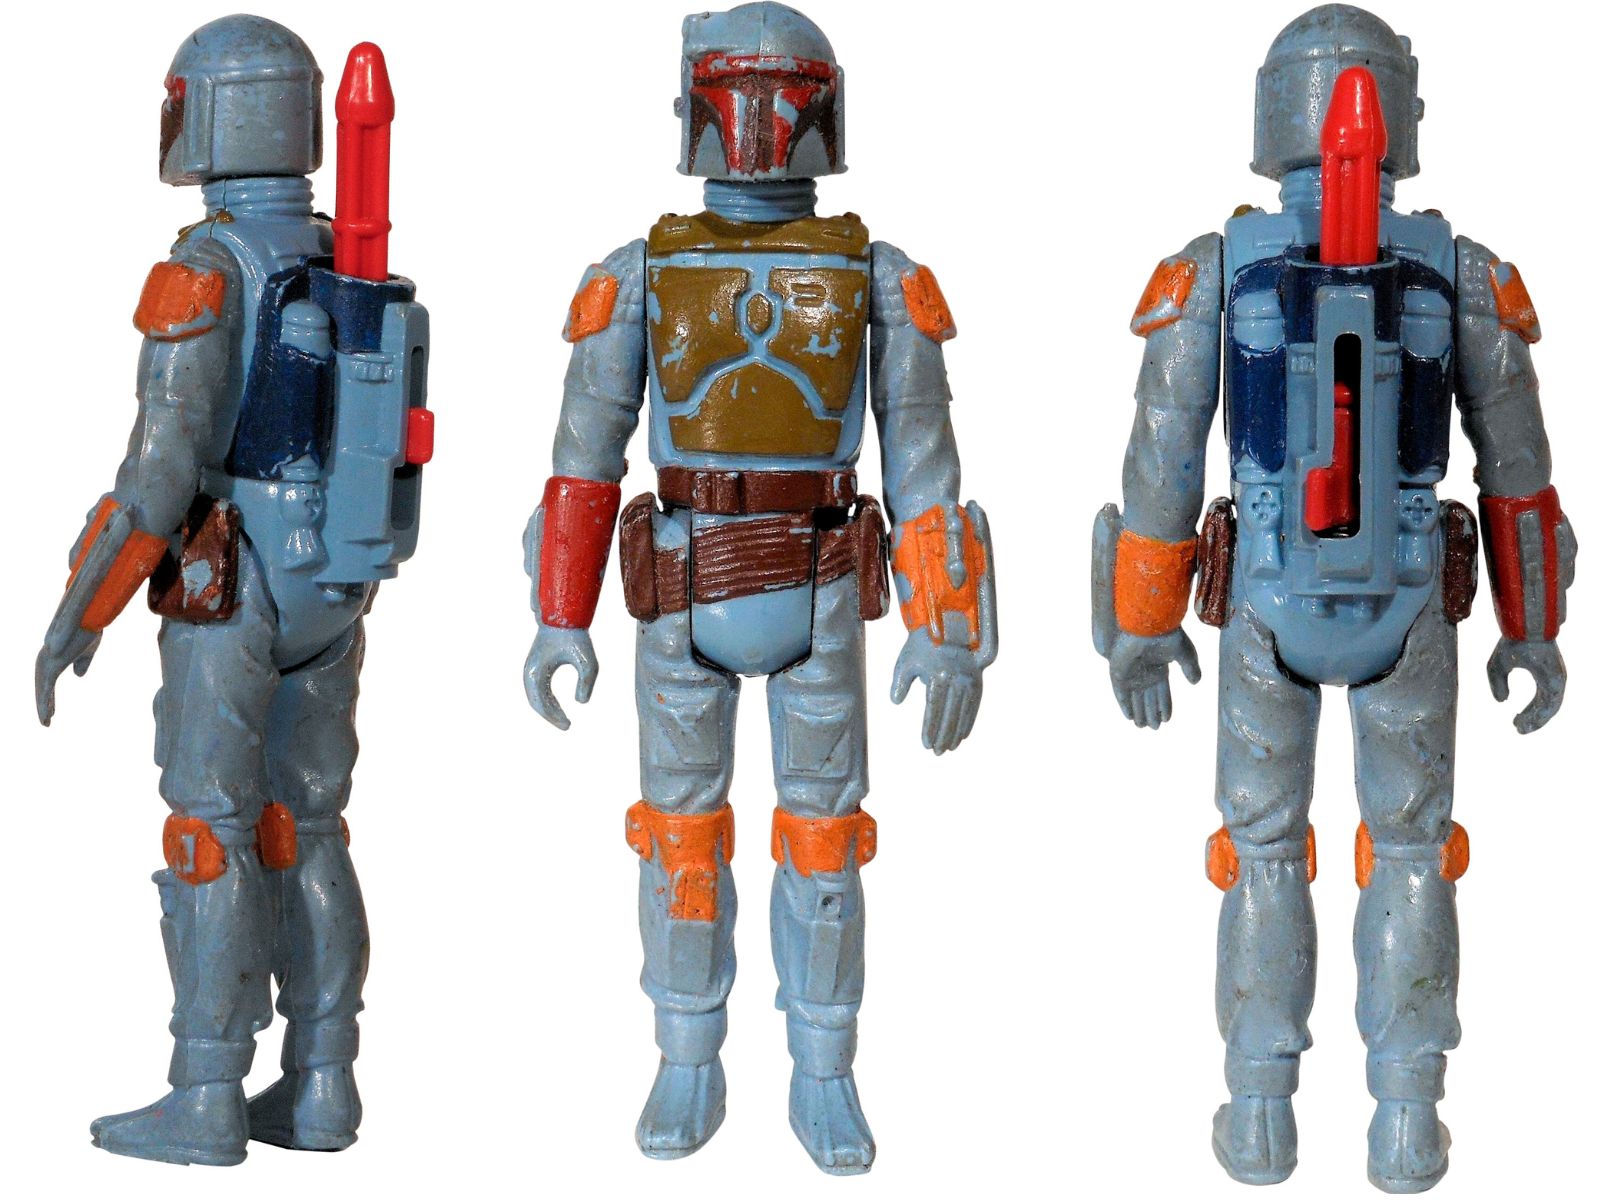 Boba Fett Action Figure Becomes Most Valuable Toy Ever Sold